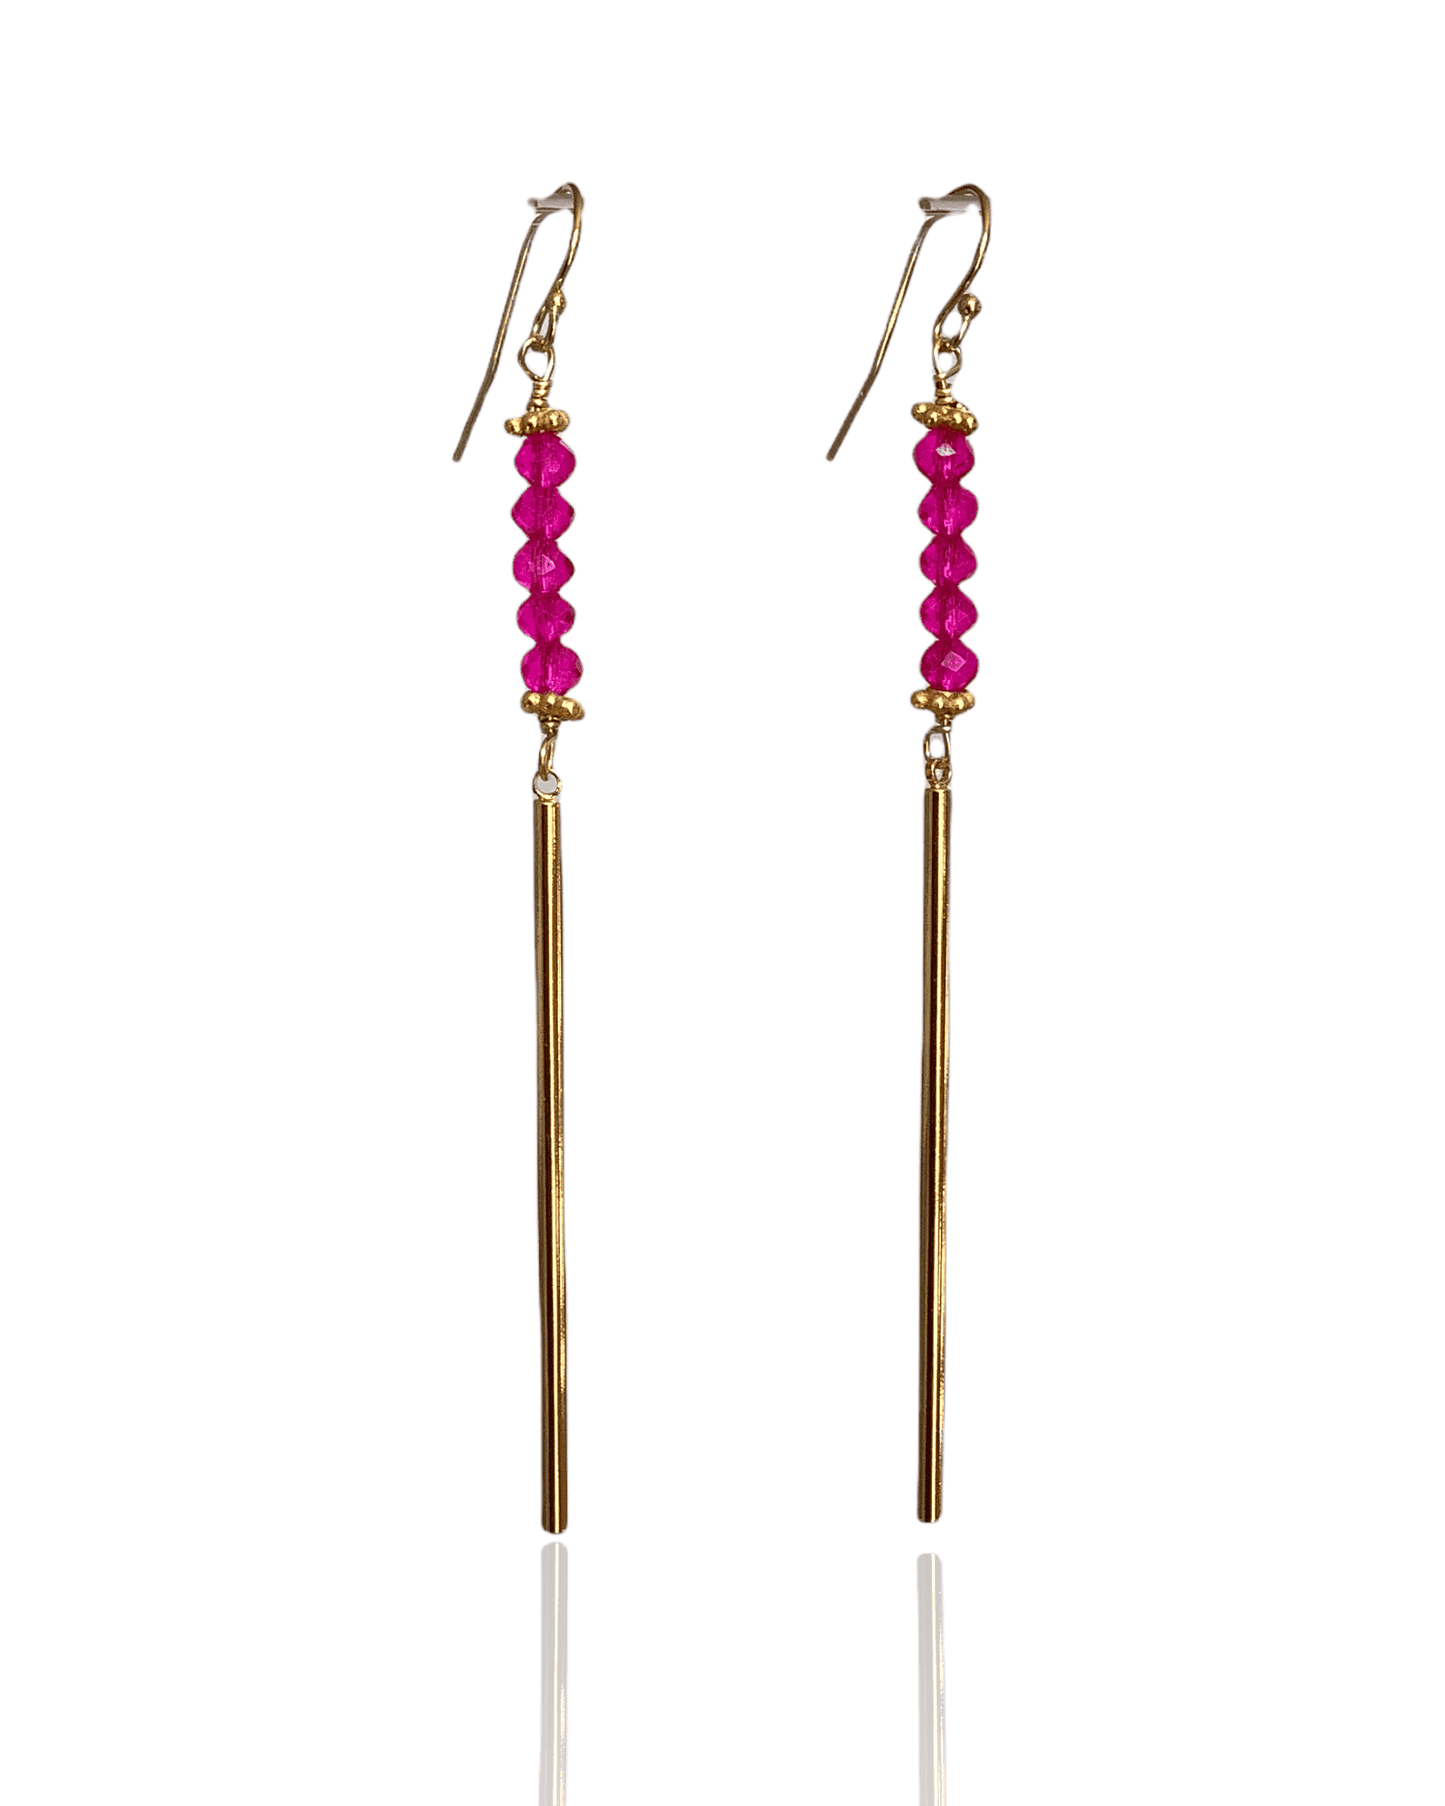 These Hot Pink Quartz and long bar accent ADMK Earrings will give your outfit the perfect POP it is looking for.  